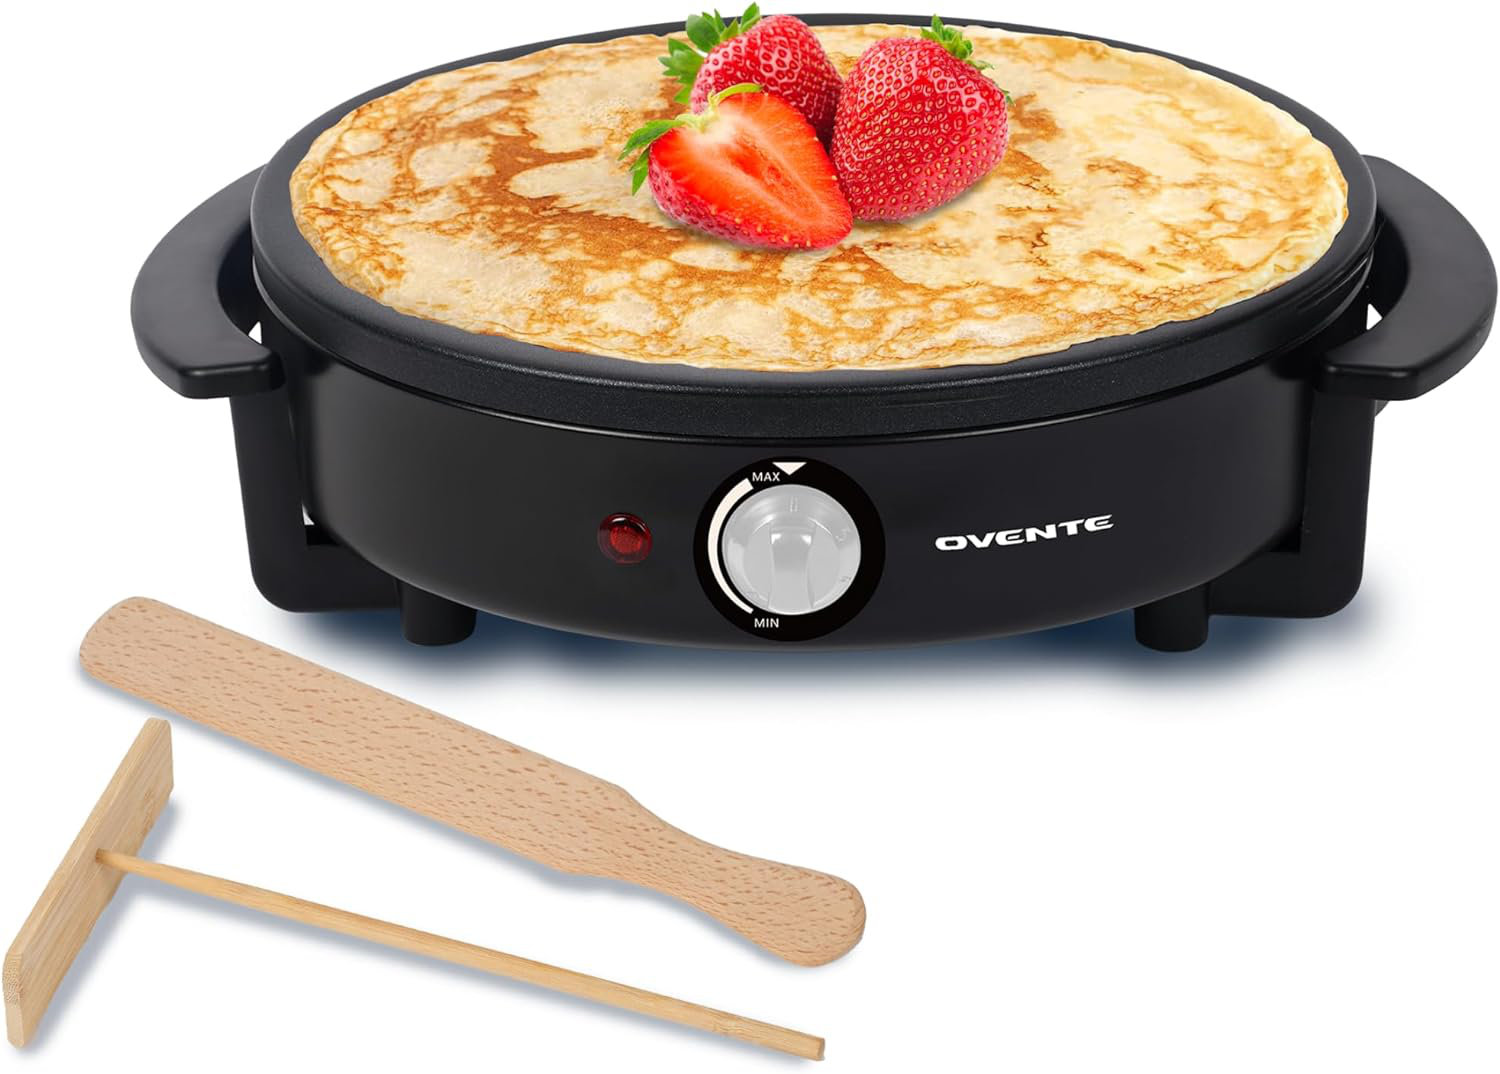 Detachable Electric Crepe Maker Griddle - Griddle Easy Cleaning Nonstick 12  Inch, Adjustable Temperature Control, Wooden Spatula & Batter Spreader  Included 